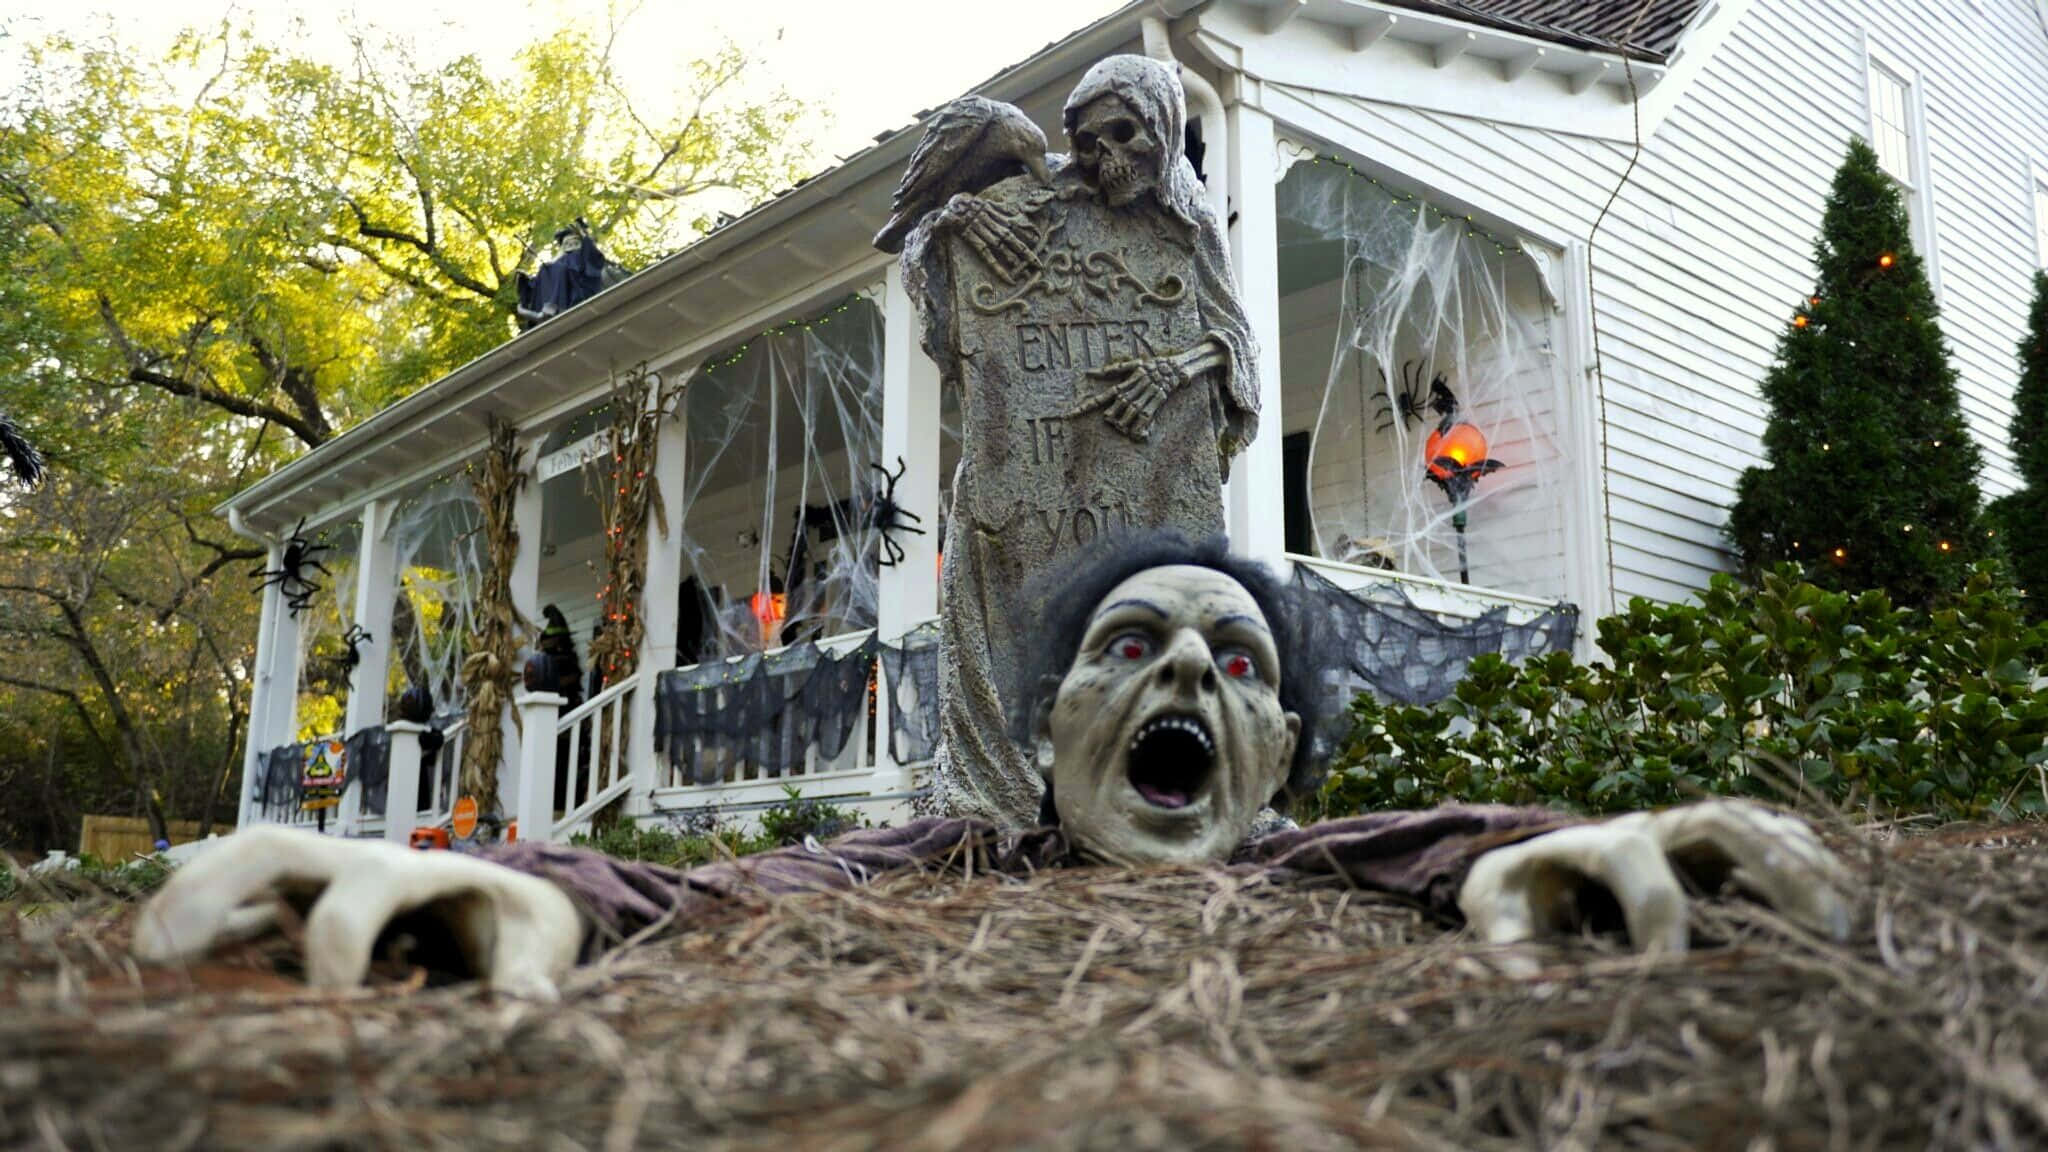 "Make Your Halloween Monstrously Fun with These Outdoor Decorations" Wallpaper